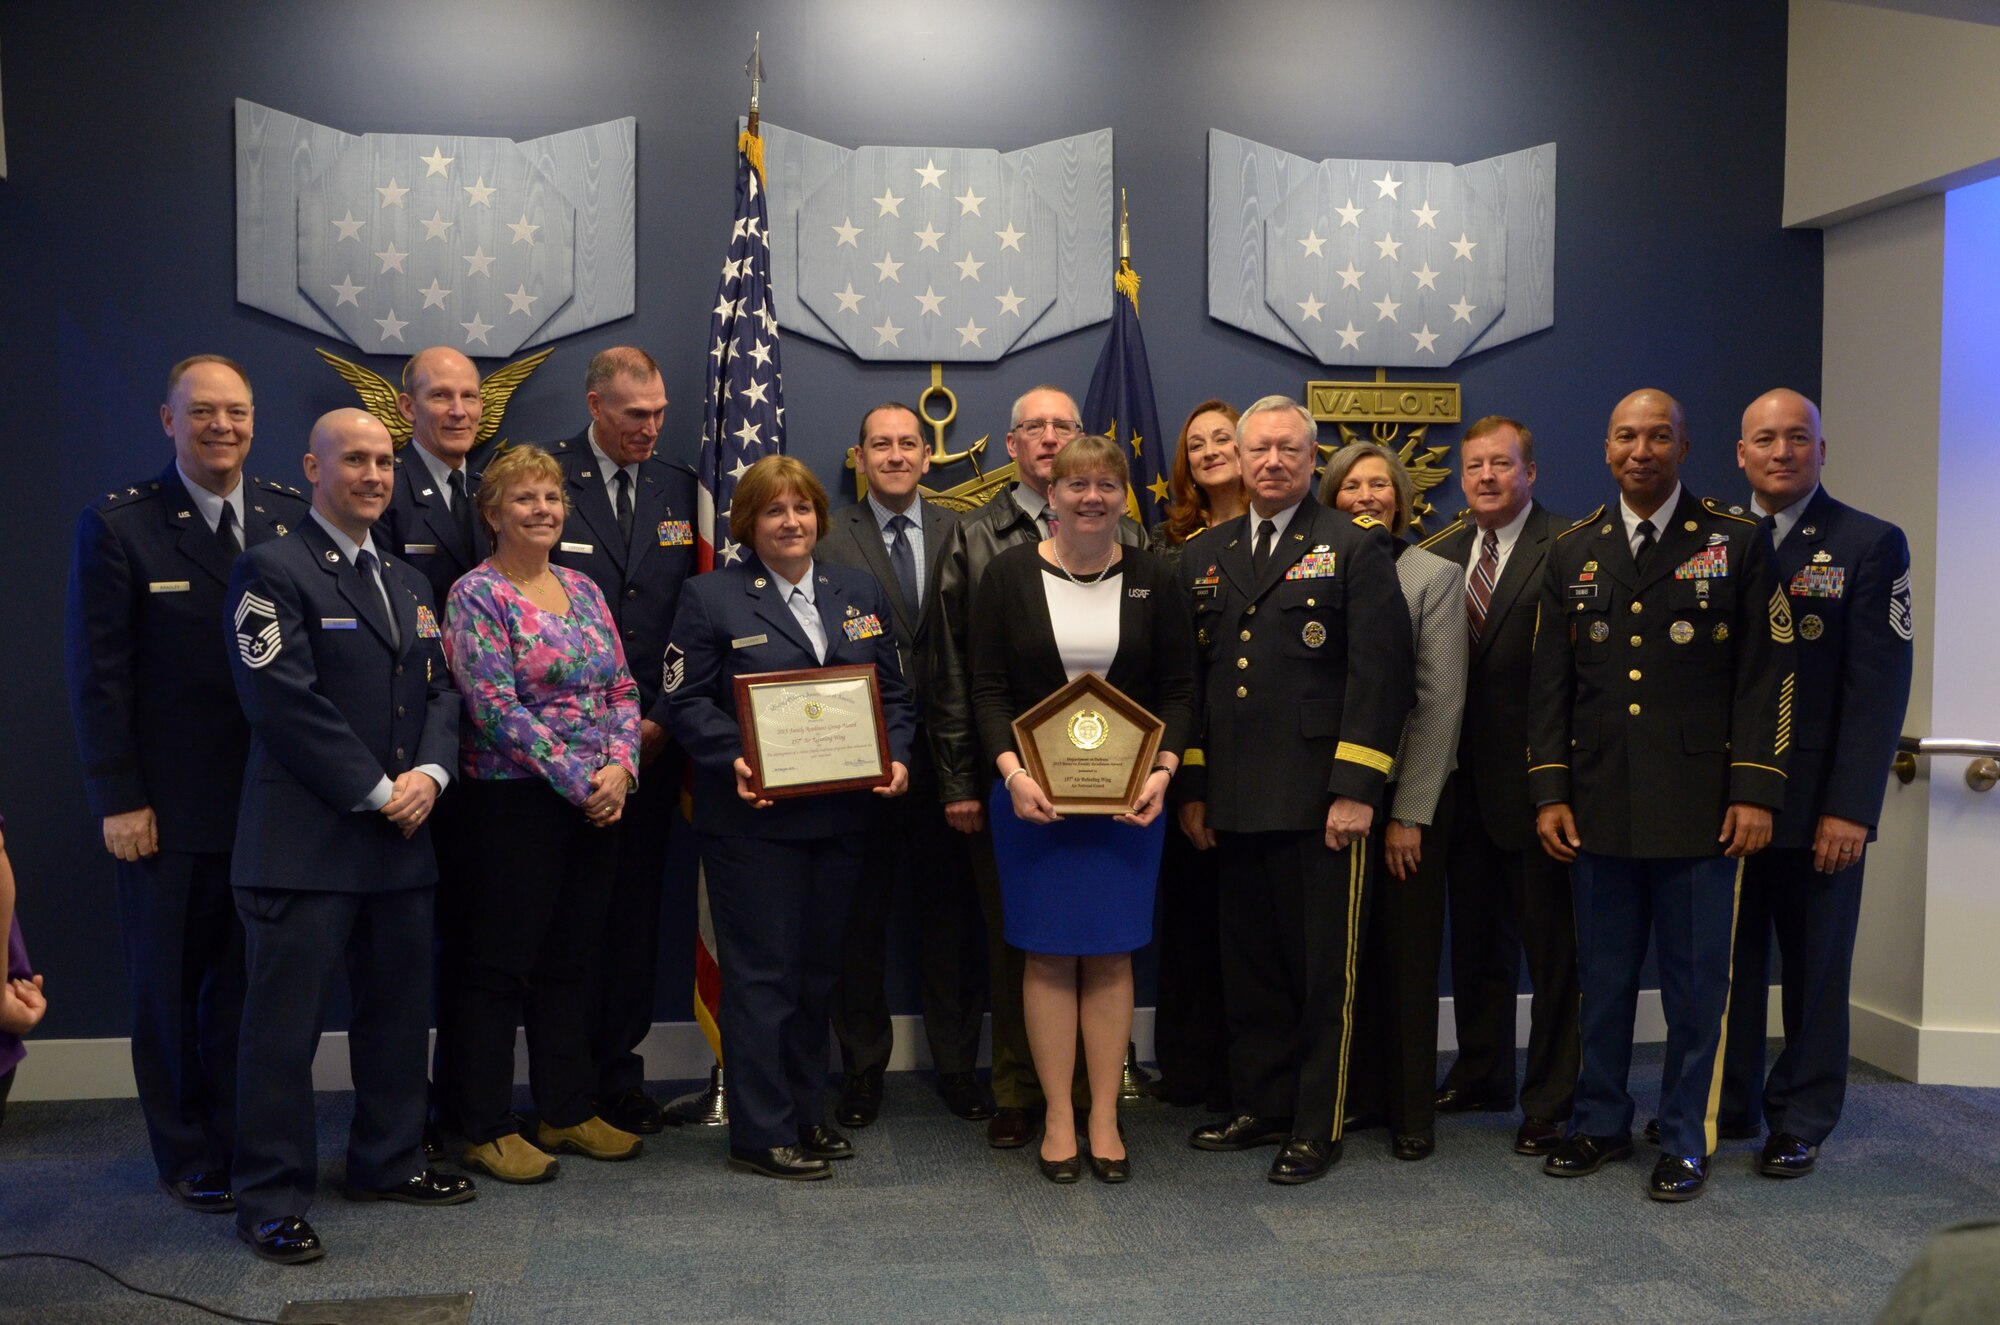 Members of the 157th Air Refueling Wing Family and Airmen Readiness Program pose for a photo with Army Reserve leadership after a ceremony at the Pentagon Hall of Heroes, Feb. 26, 2016. The 157 ARW AFRP has been recognized for the third time as the best in the U.S. Air National Guard by winning a 2015 Department of Defense Reserve Family Readiness Award. (U.S. Air National Guard Photo by Tech. Sgt. Aaron Vezeau)